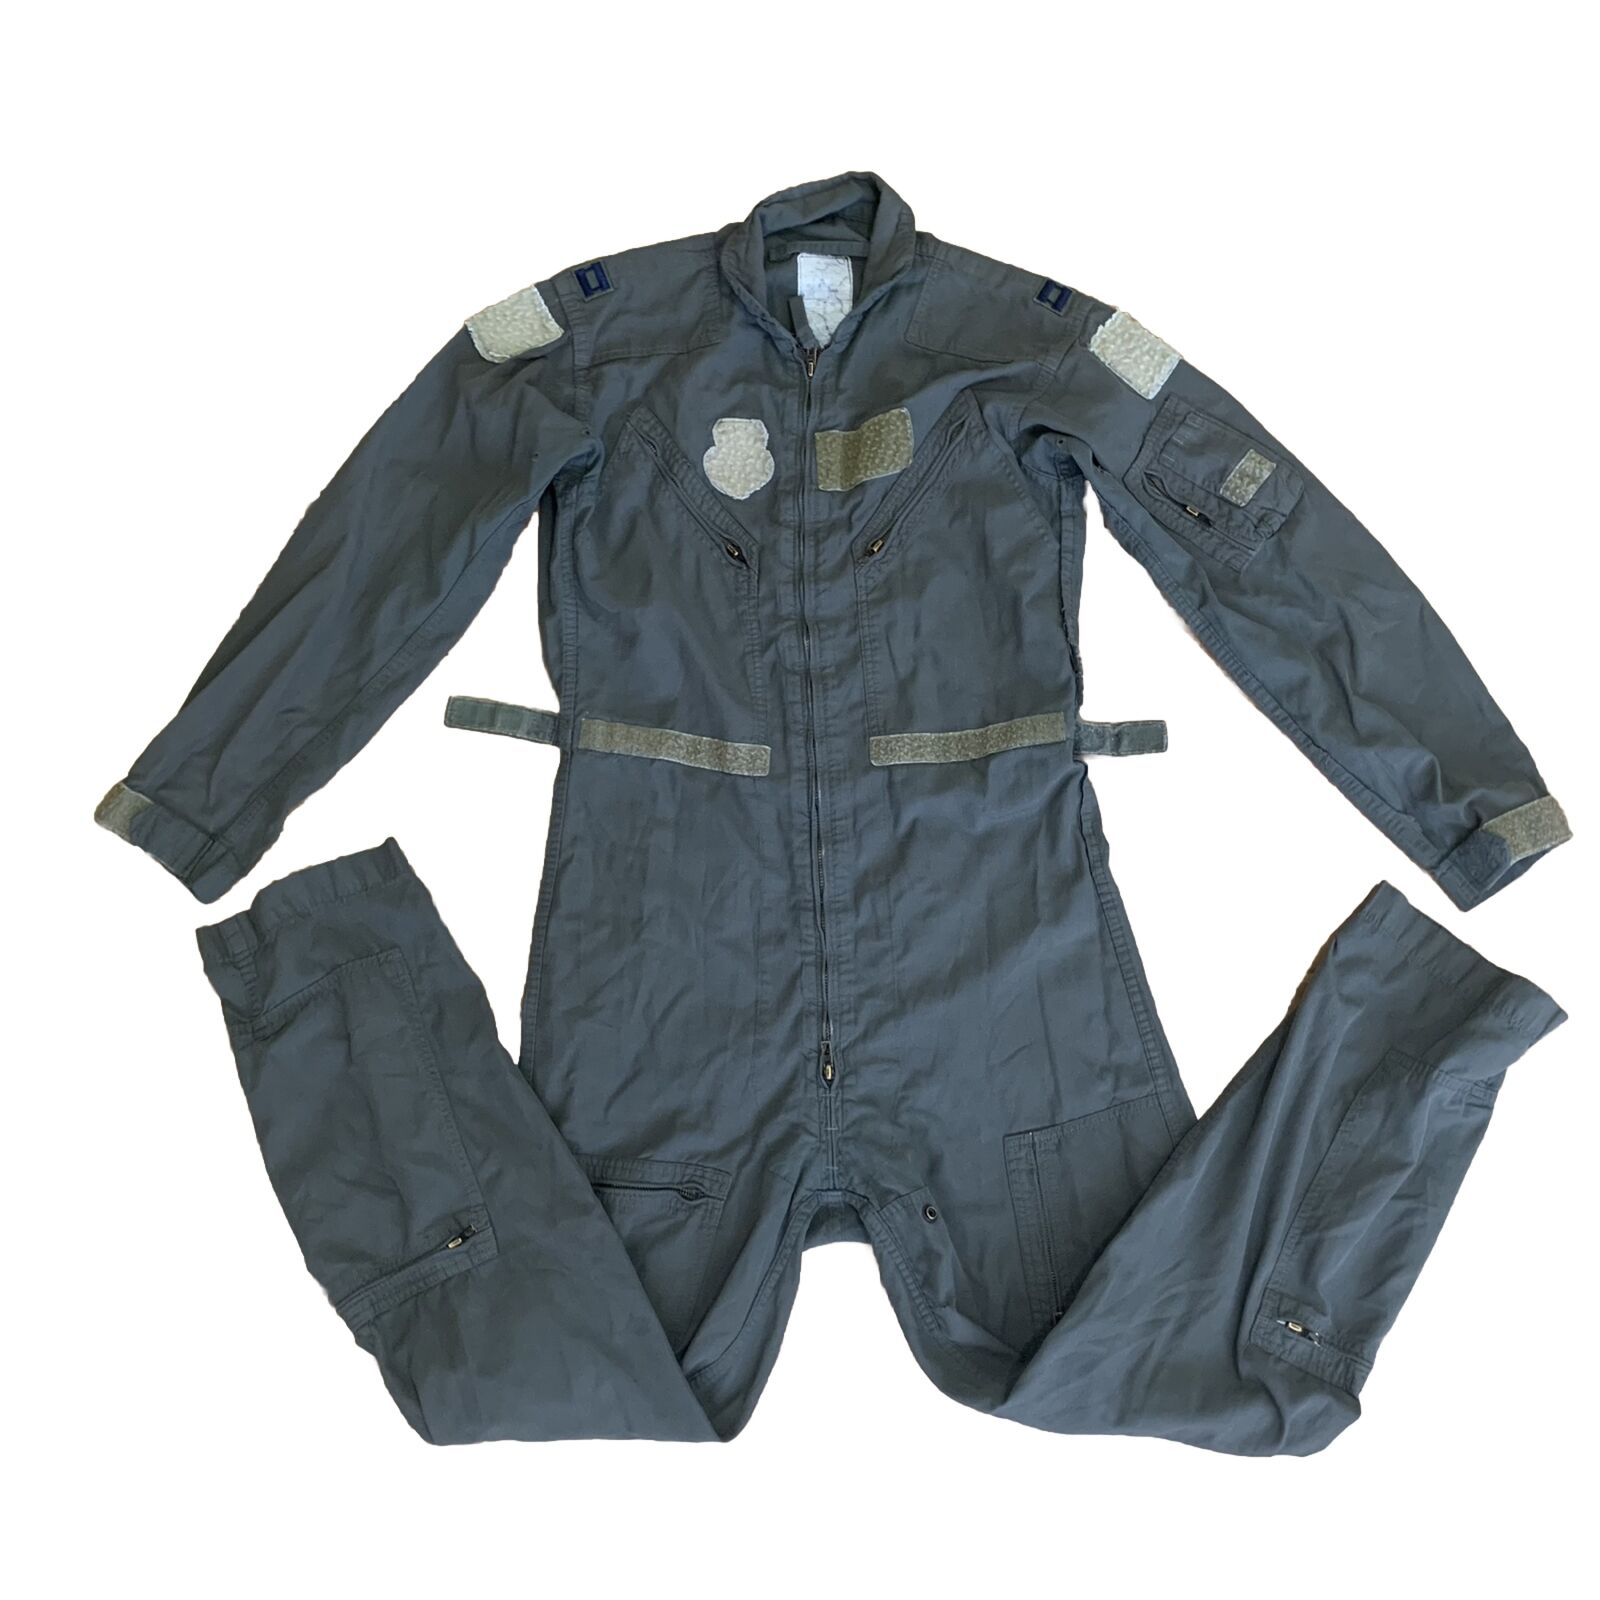 Coveralls Flyers CWU-27/P Freedom Green Flight Suit Propper 40 Long READ